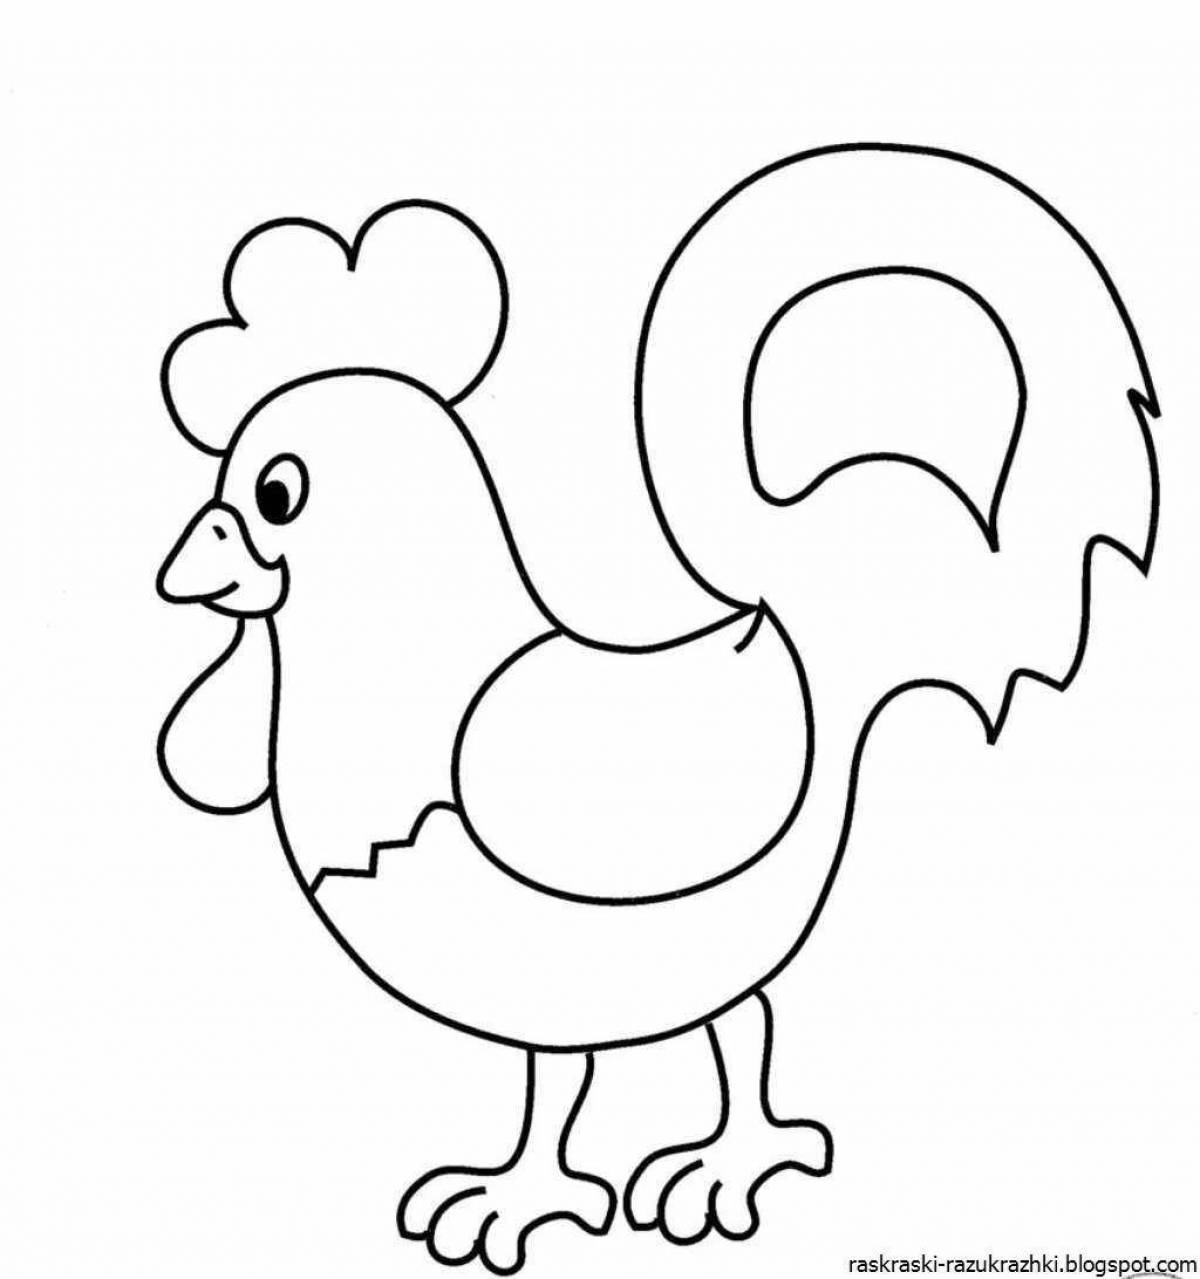 Coloring book playful rooster